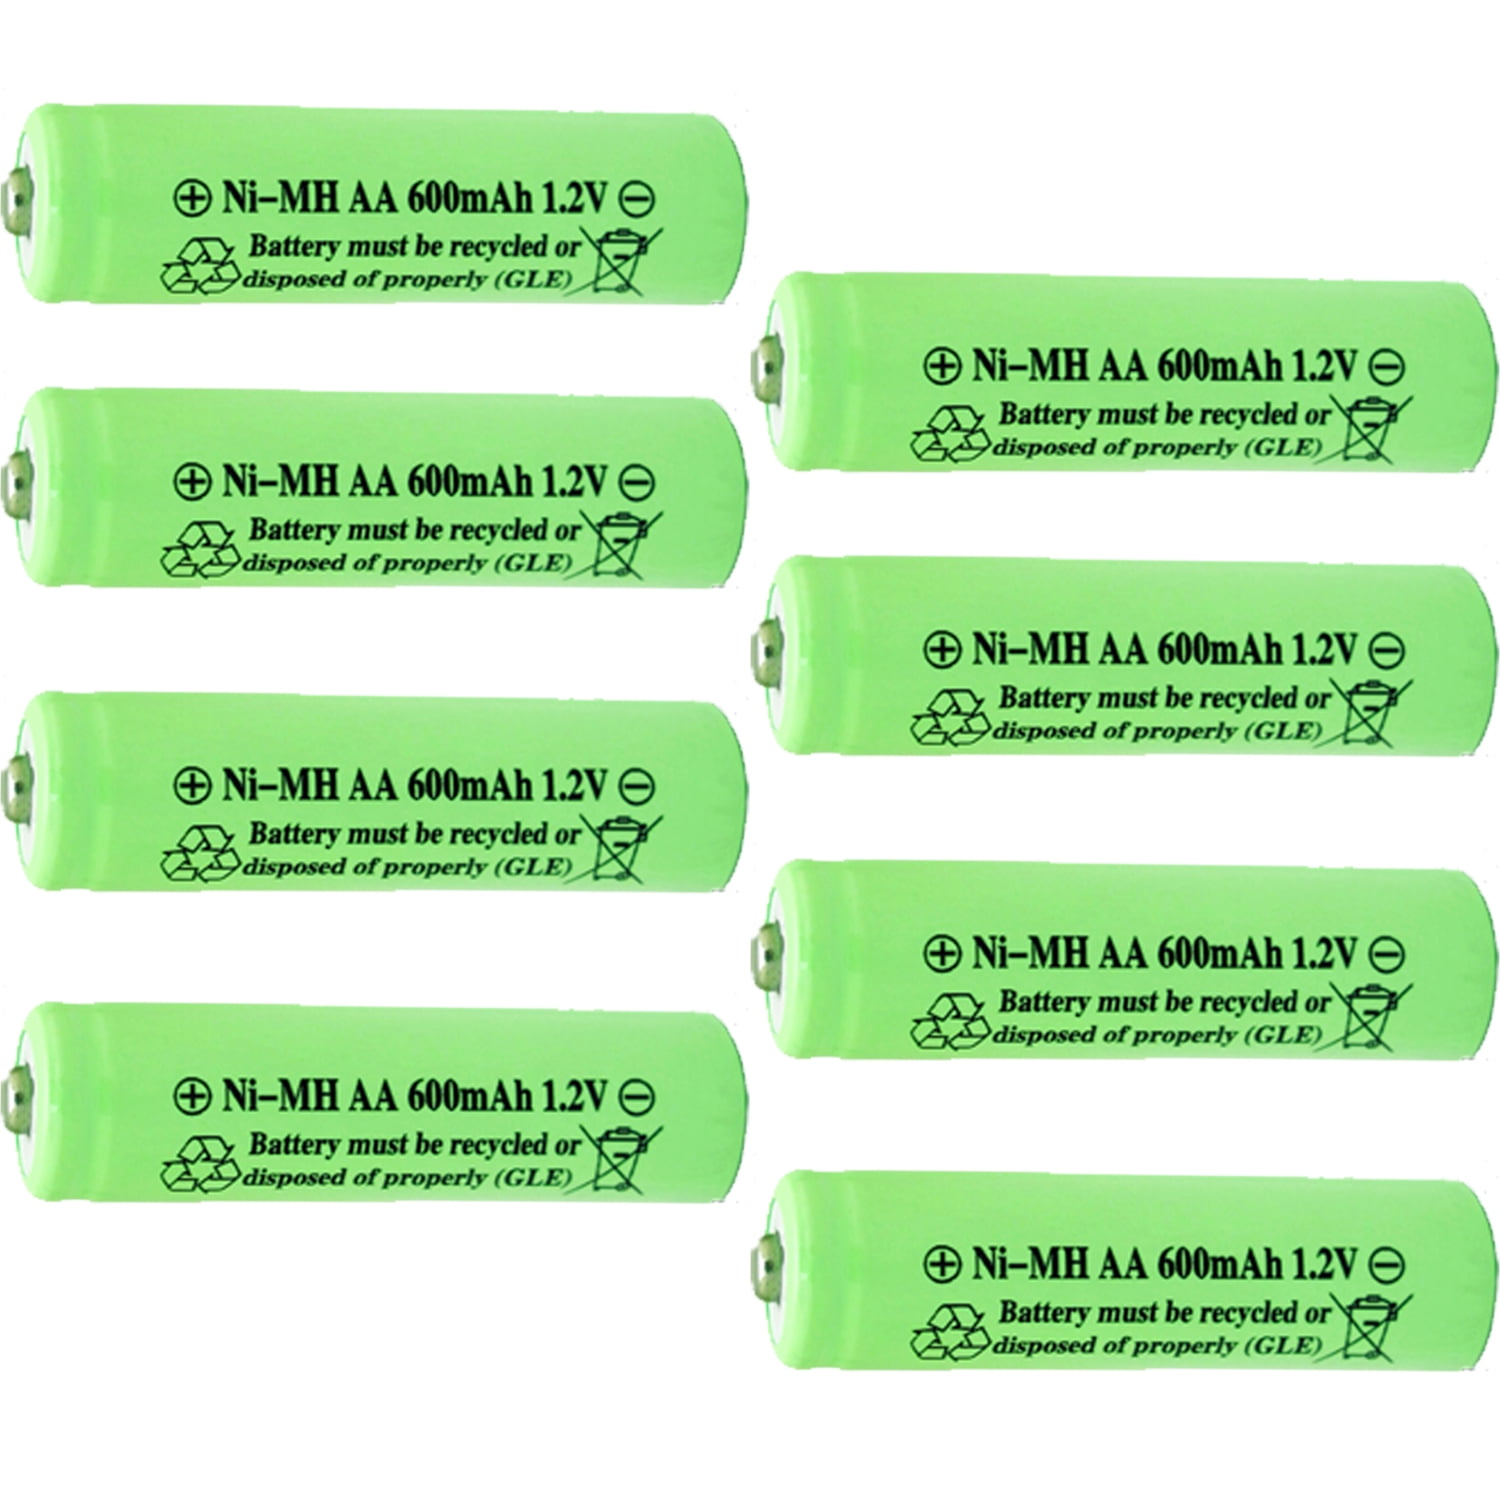 Duracell DX1500R4 Precharged Rechargeable NIMH Batteries 4 AA pack –  Batteries Inc.